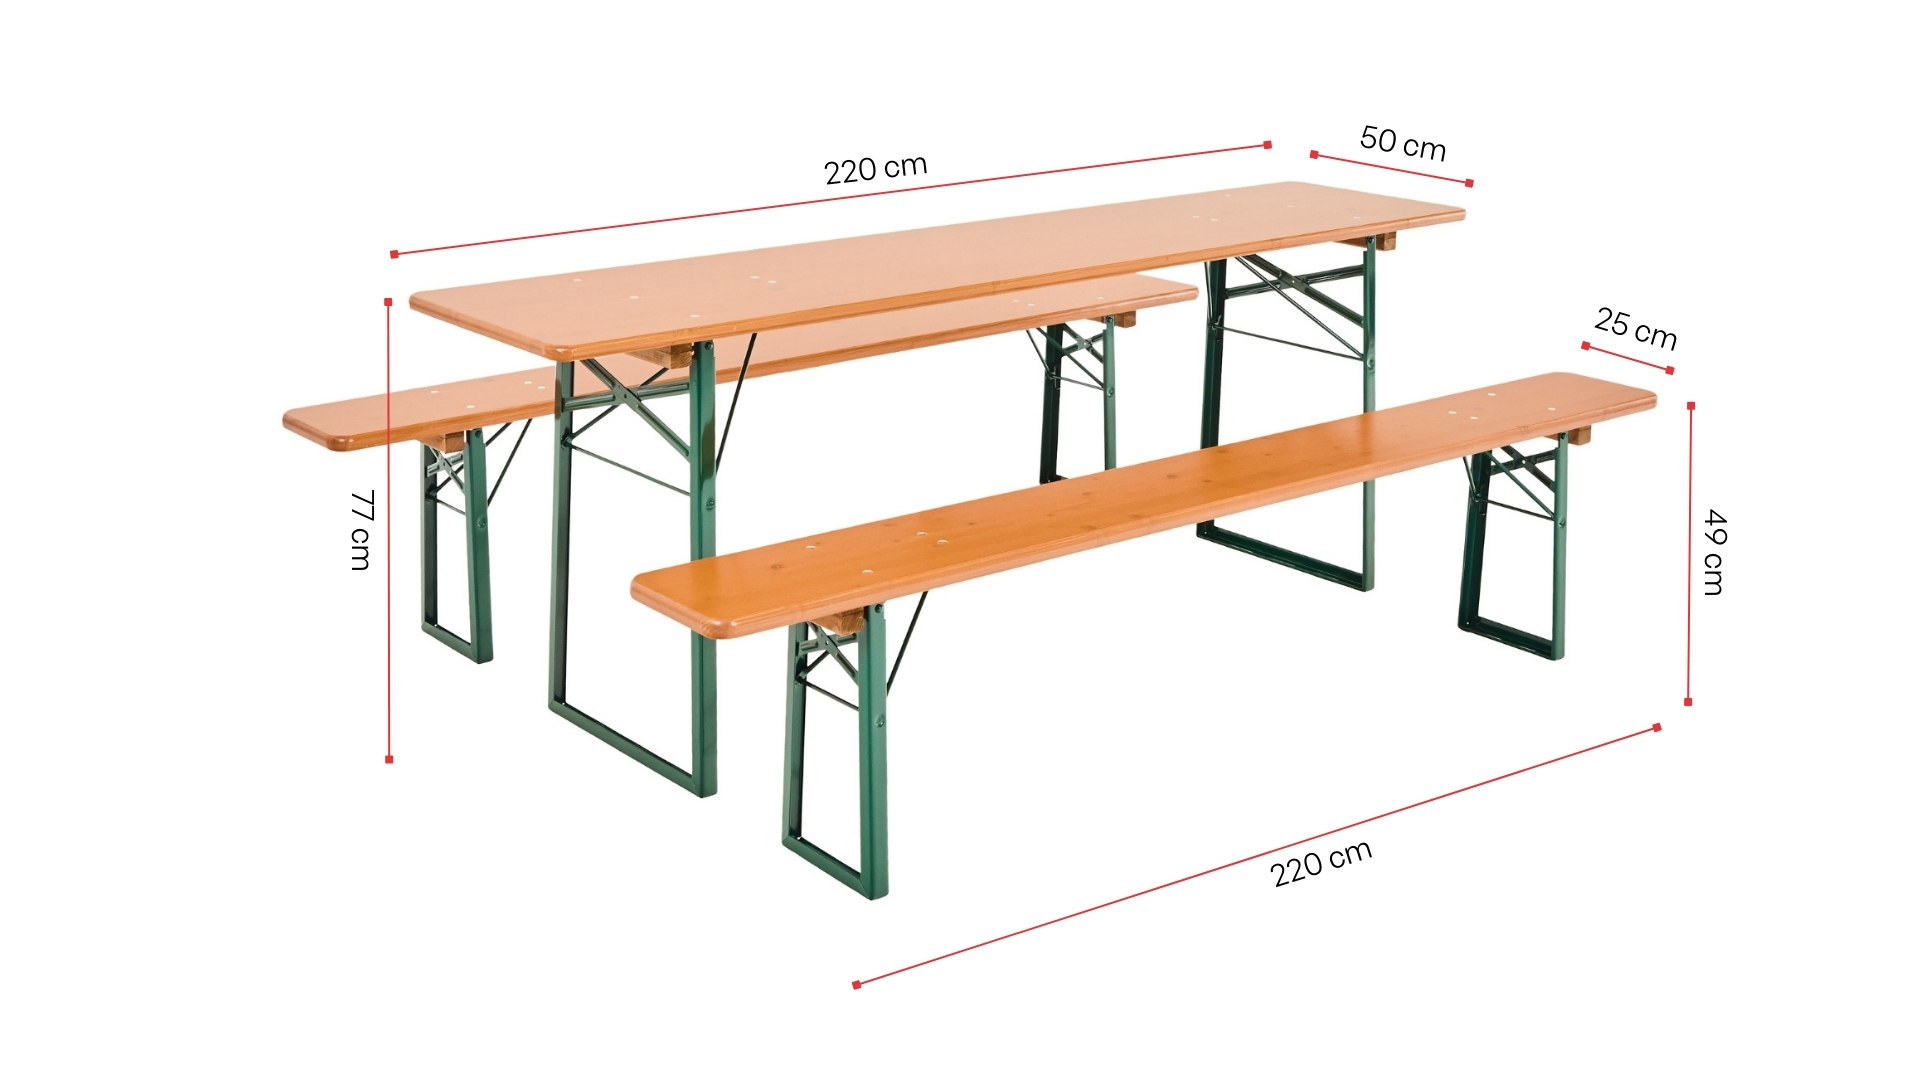 A classic beer garden table set in pine is shown with its dimensions.